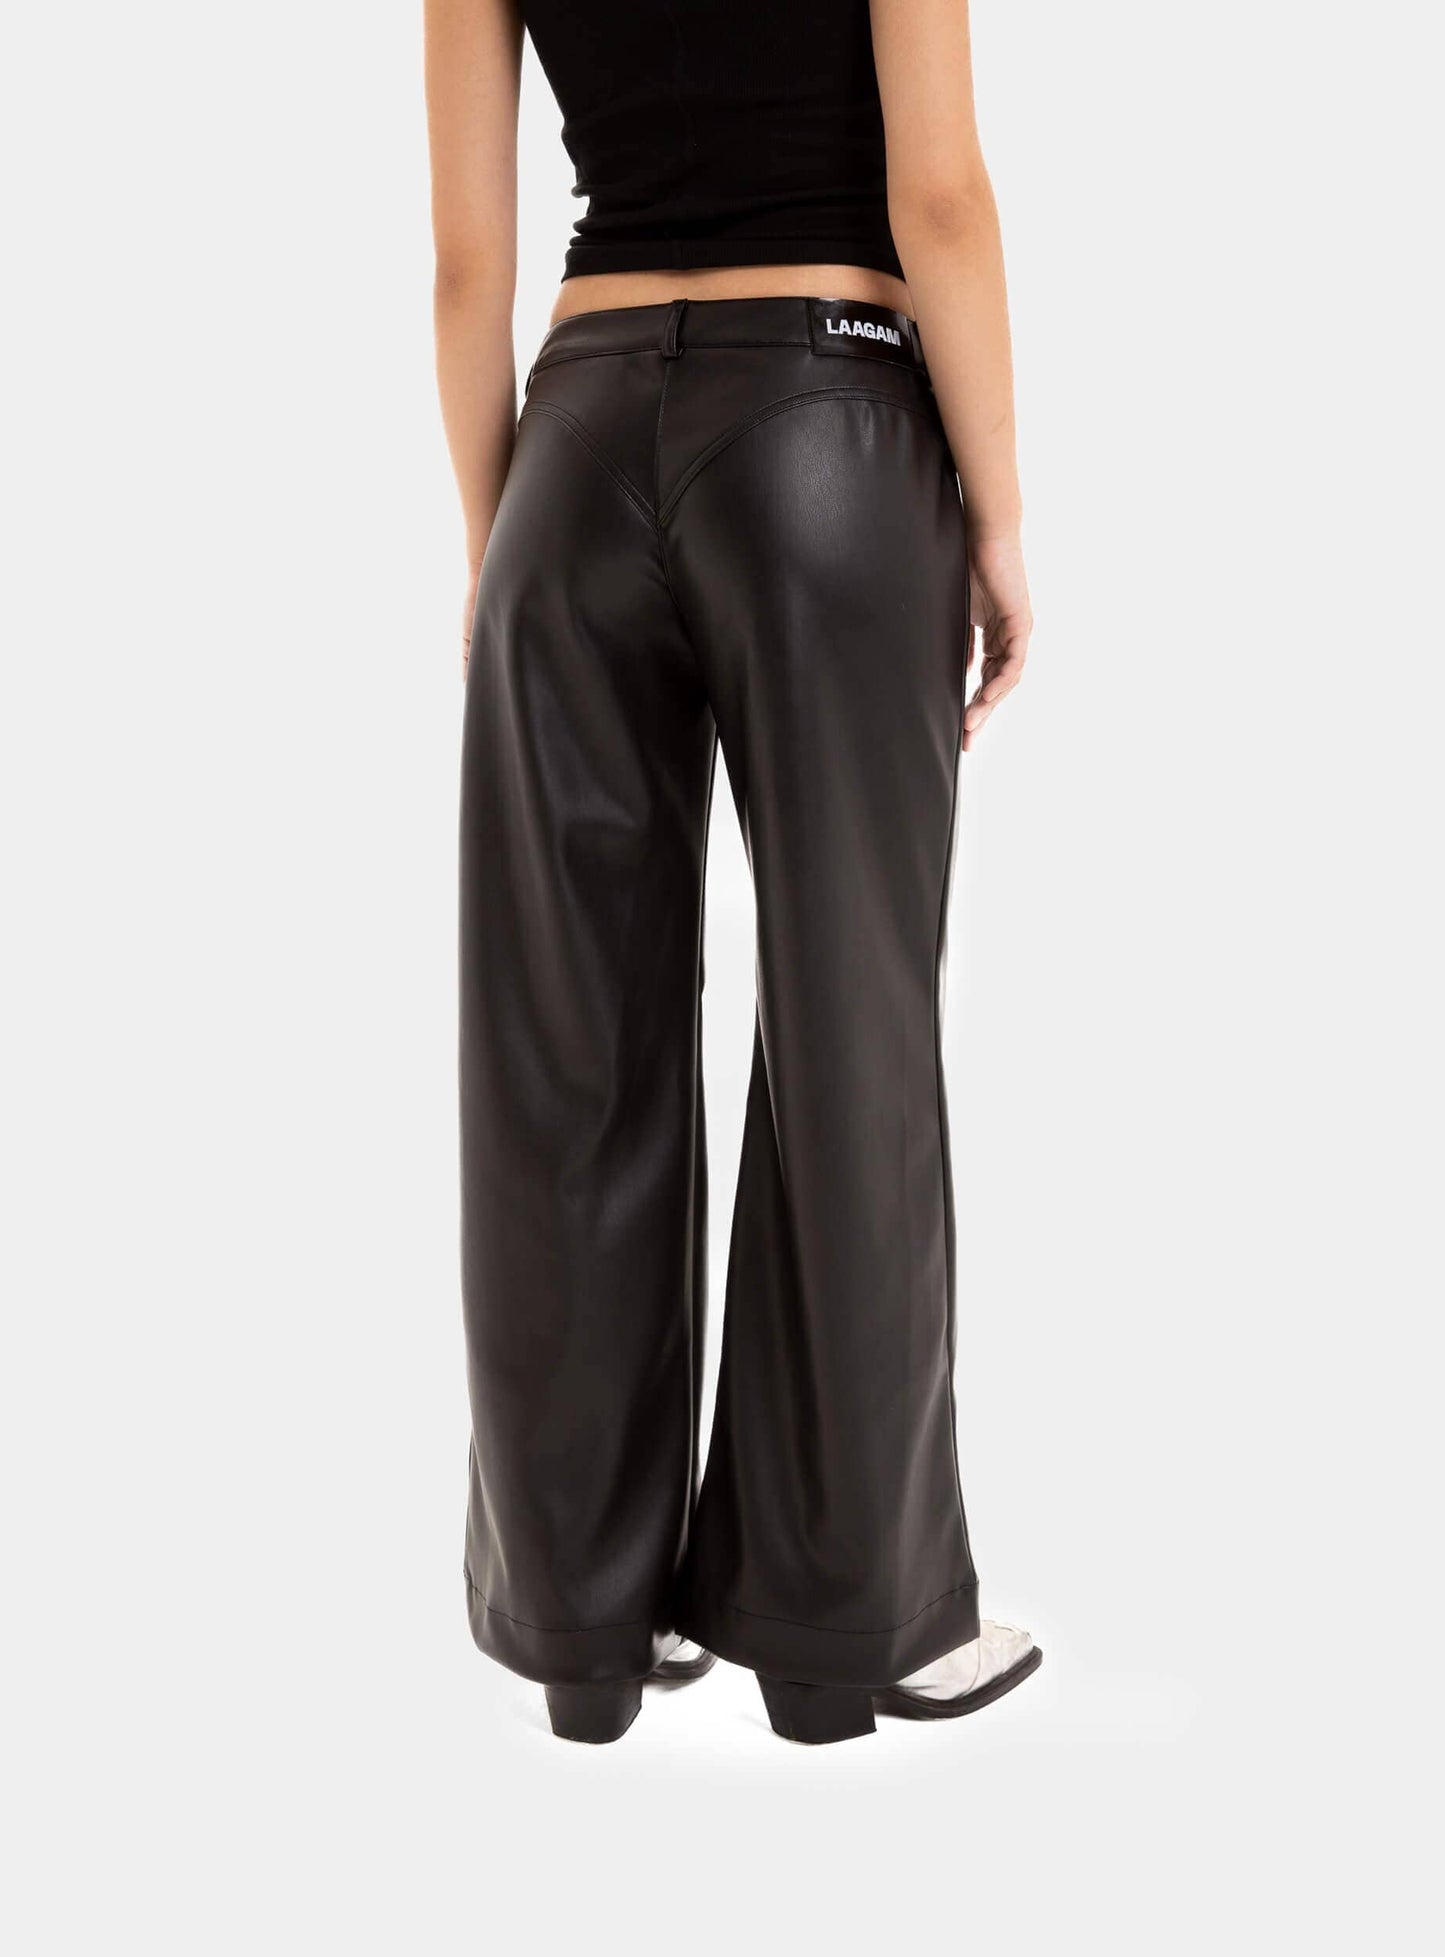 LAAGAM - HARLOW BLACK FAUX LEATHER PANTS